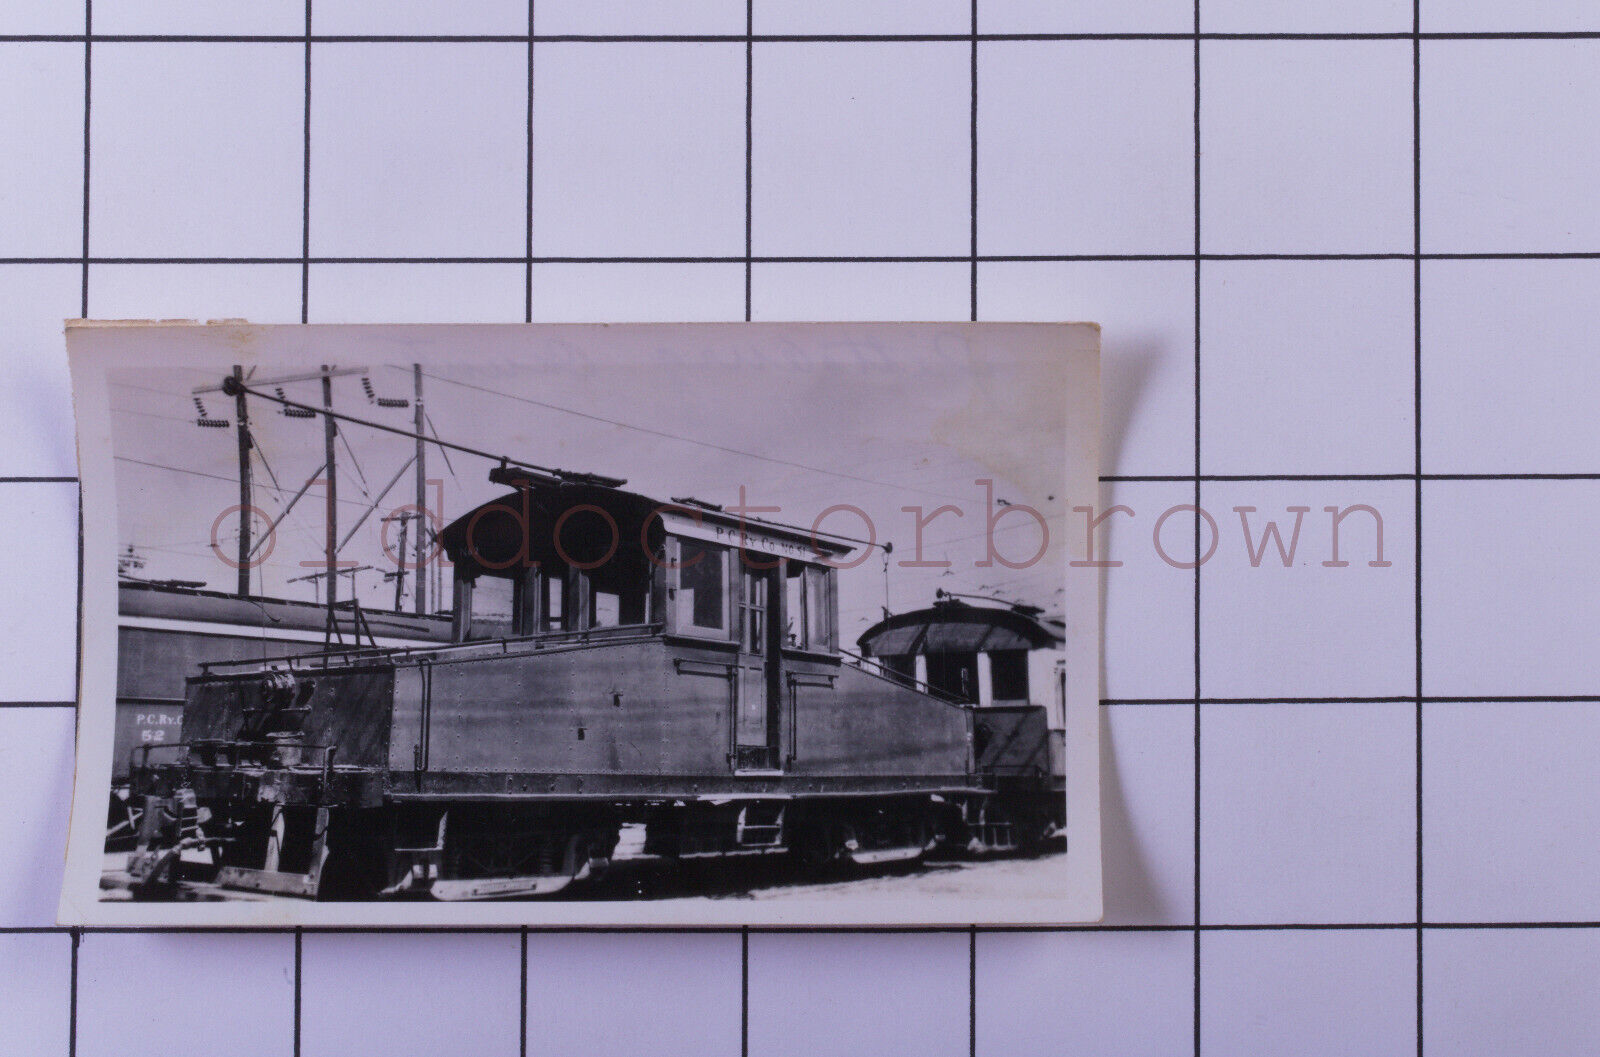 Pittsburgh County Railroad: Freight Motor No 51: Vintage Train Photo